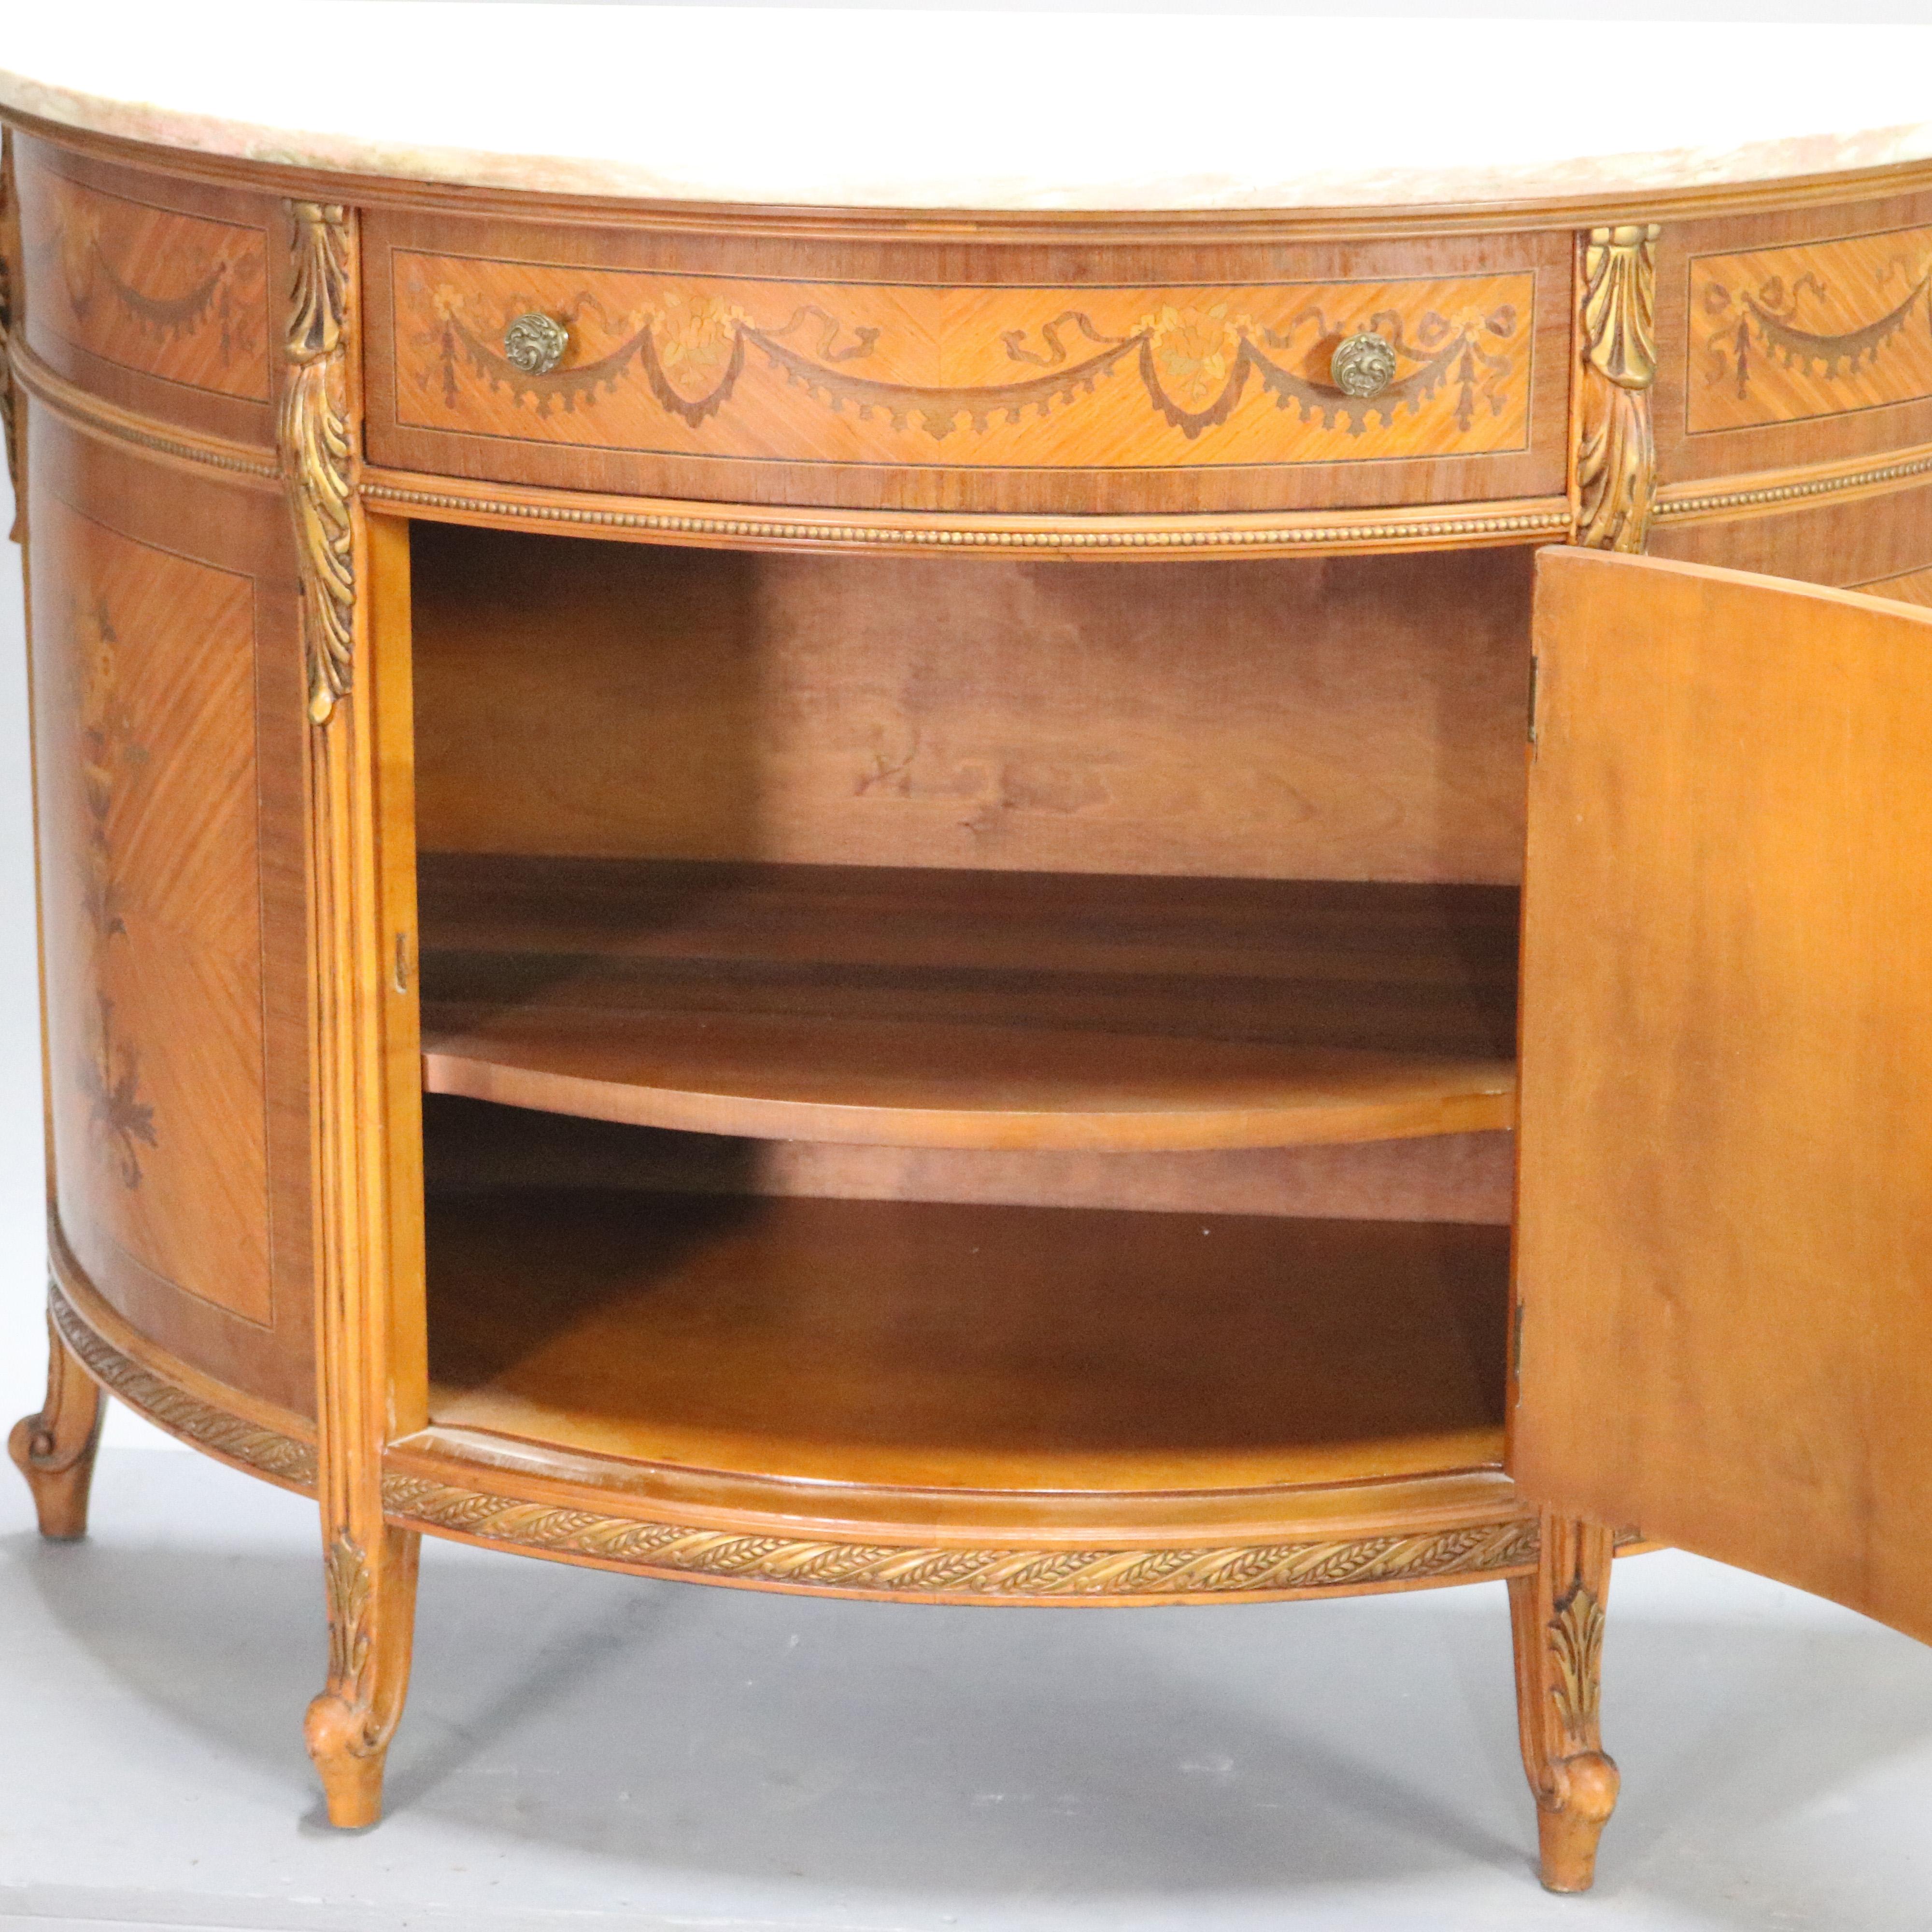 20th Century French Louis XVI Mahogany Marquetry Satinwood Inlaid Demilune Credenza